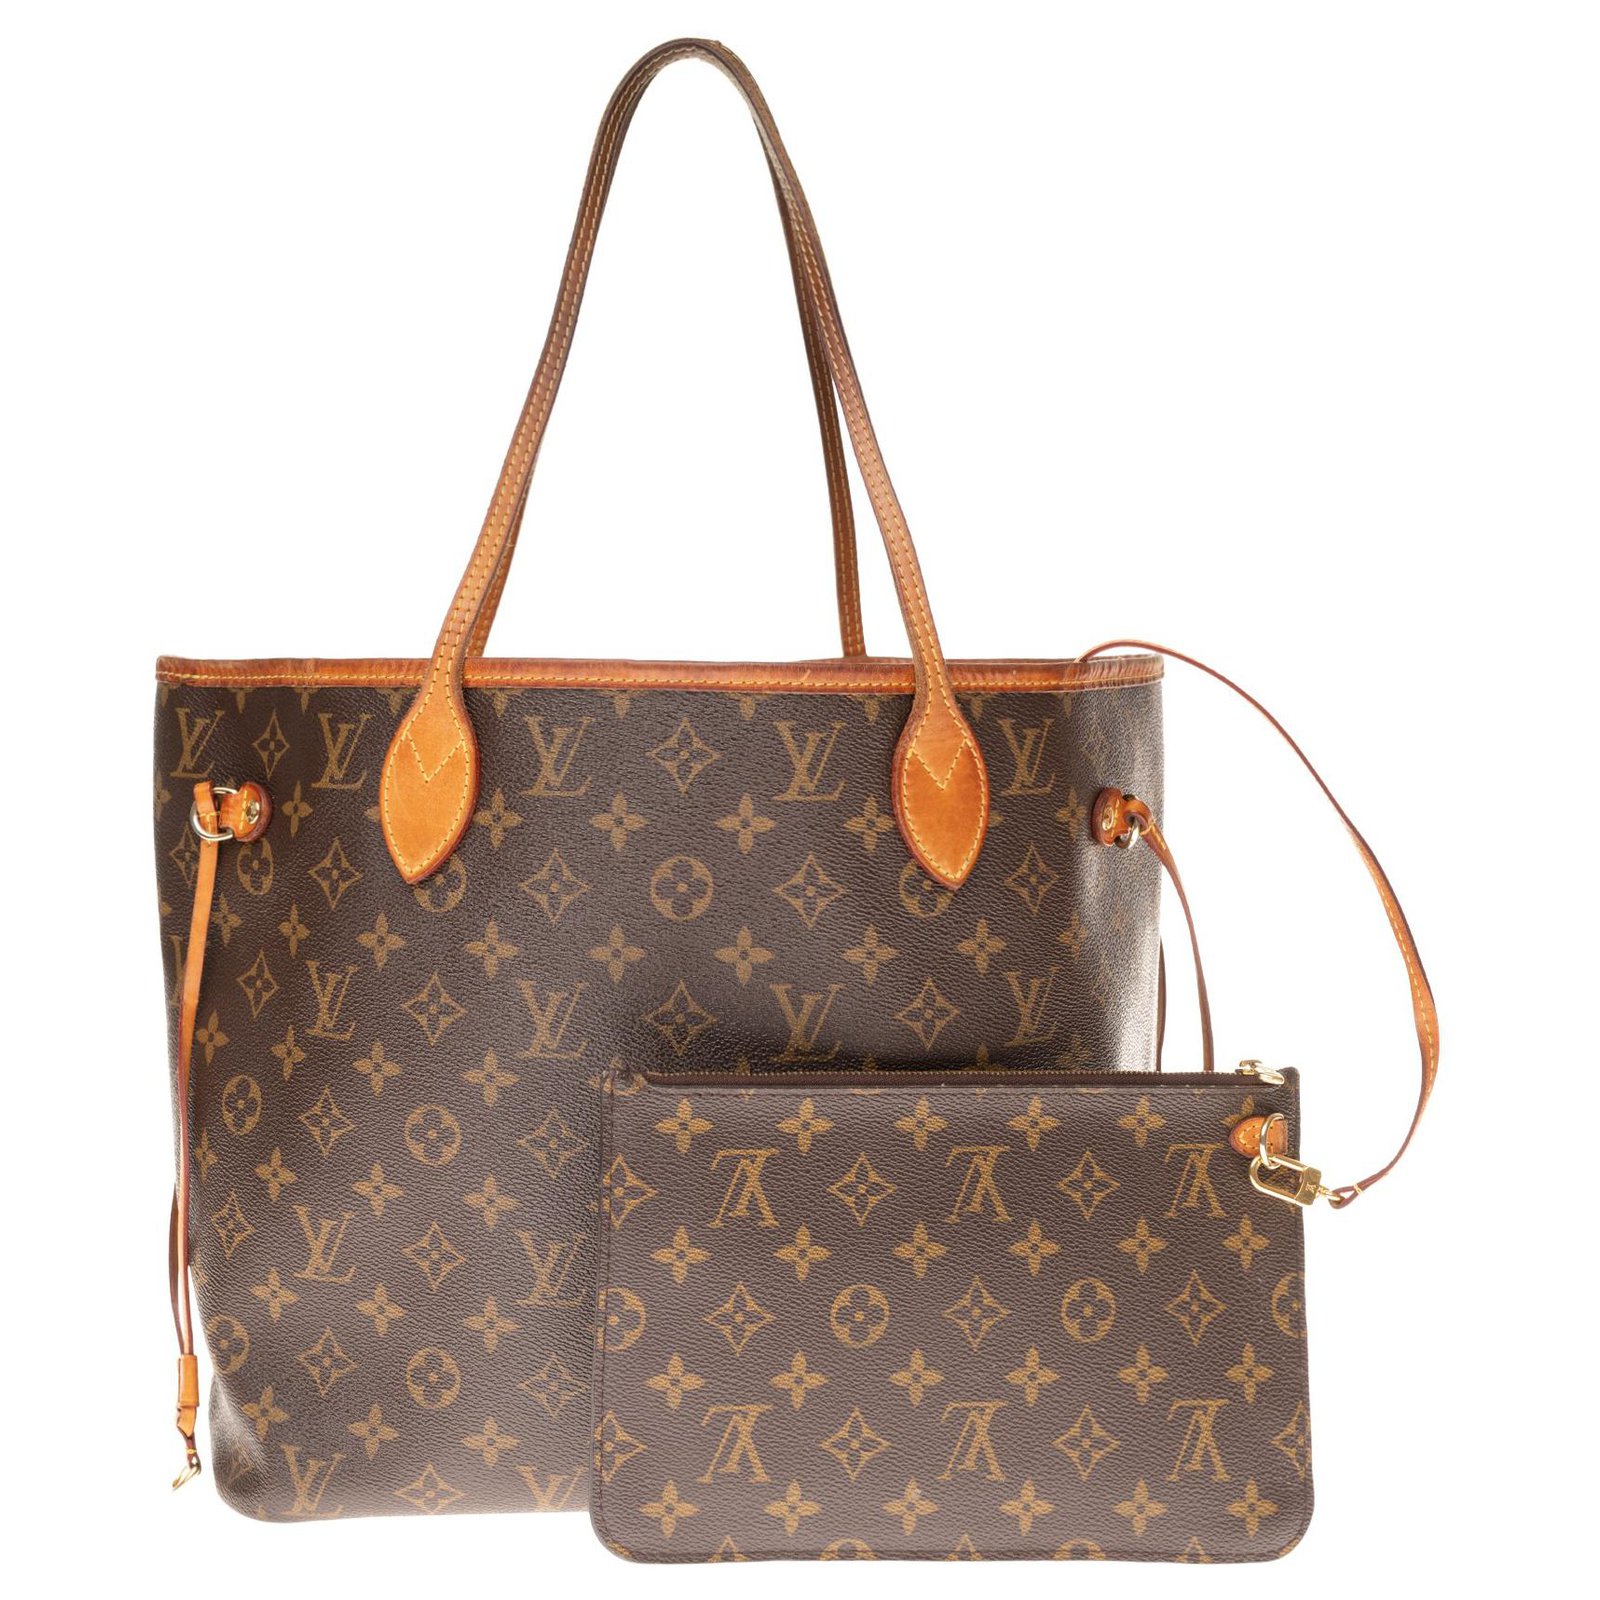 Louis Vuitton Neverfull MM bag in coated monogram canvas and